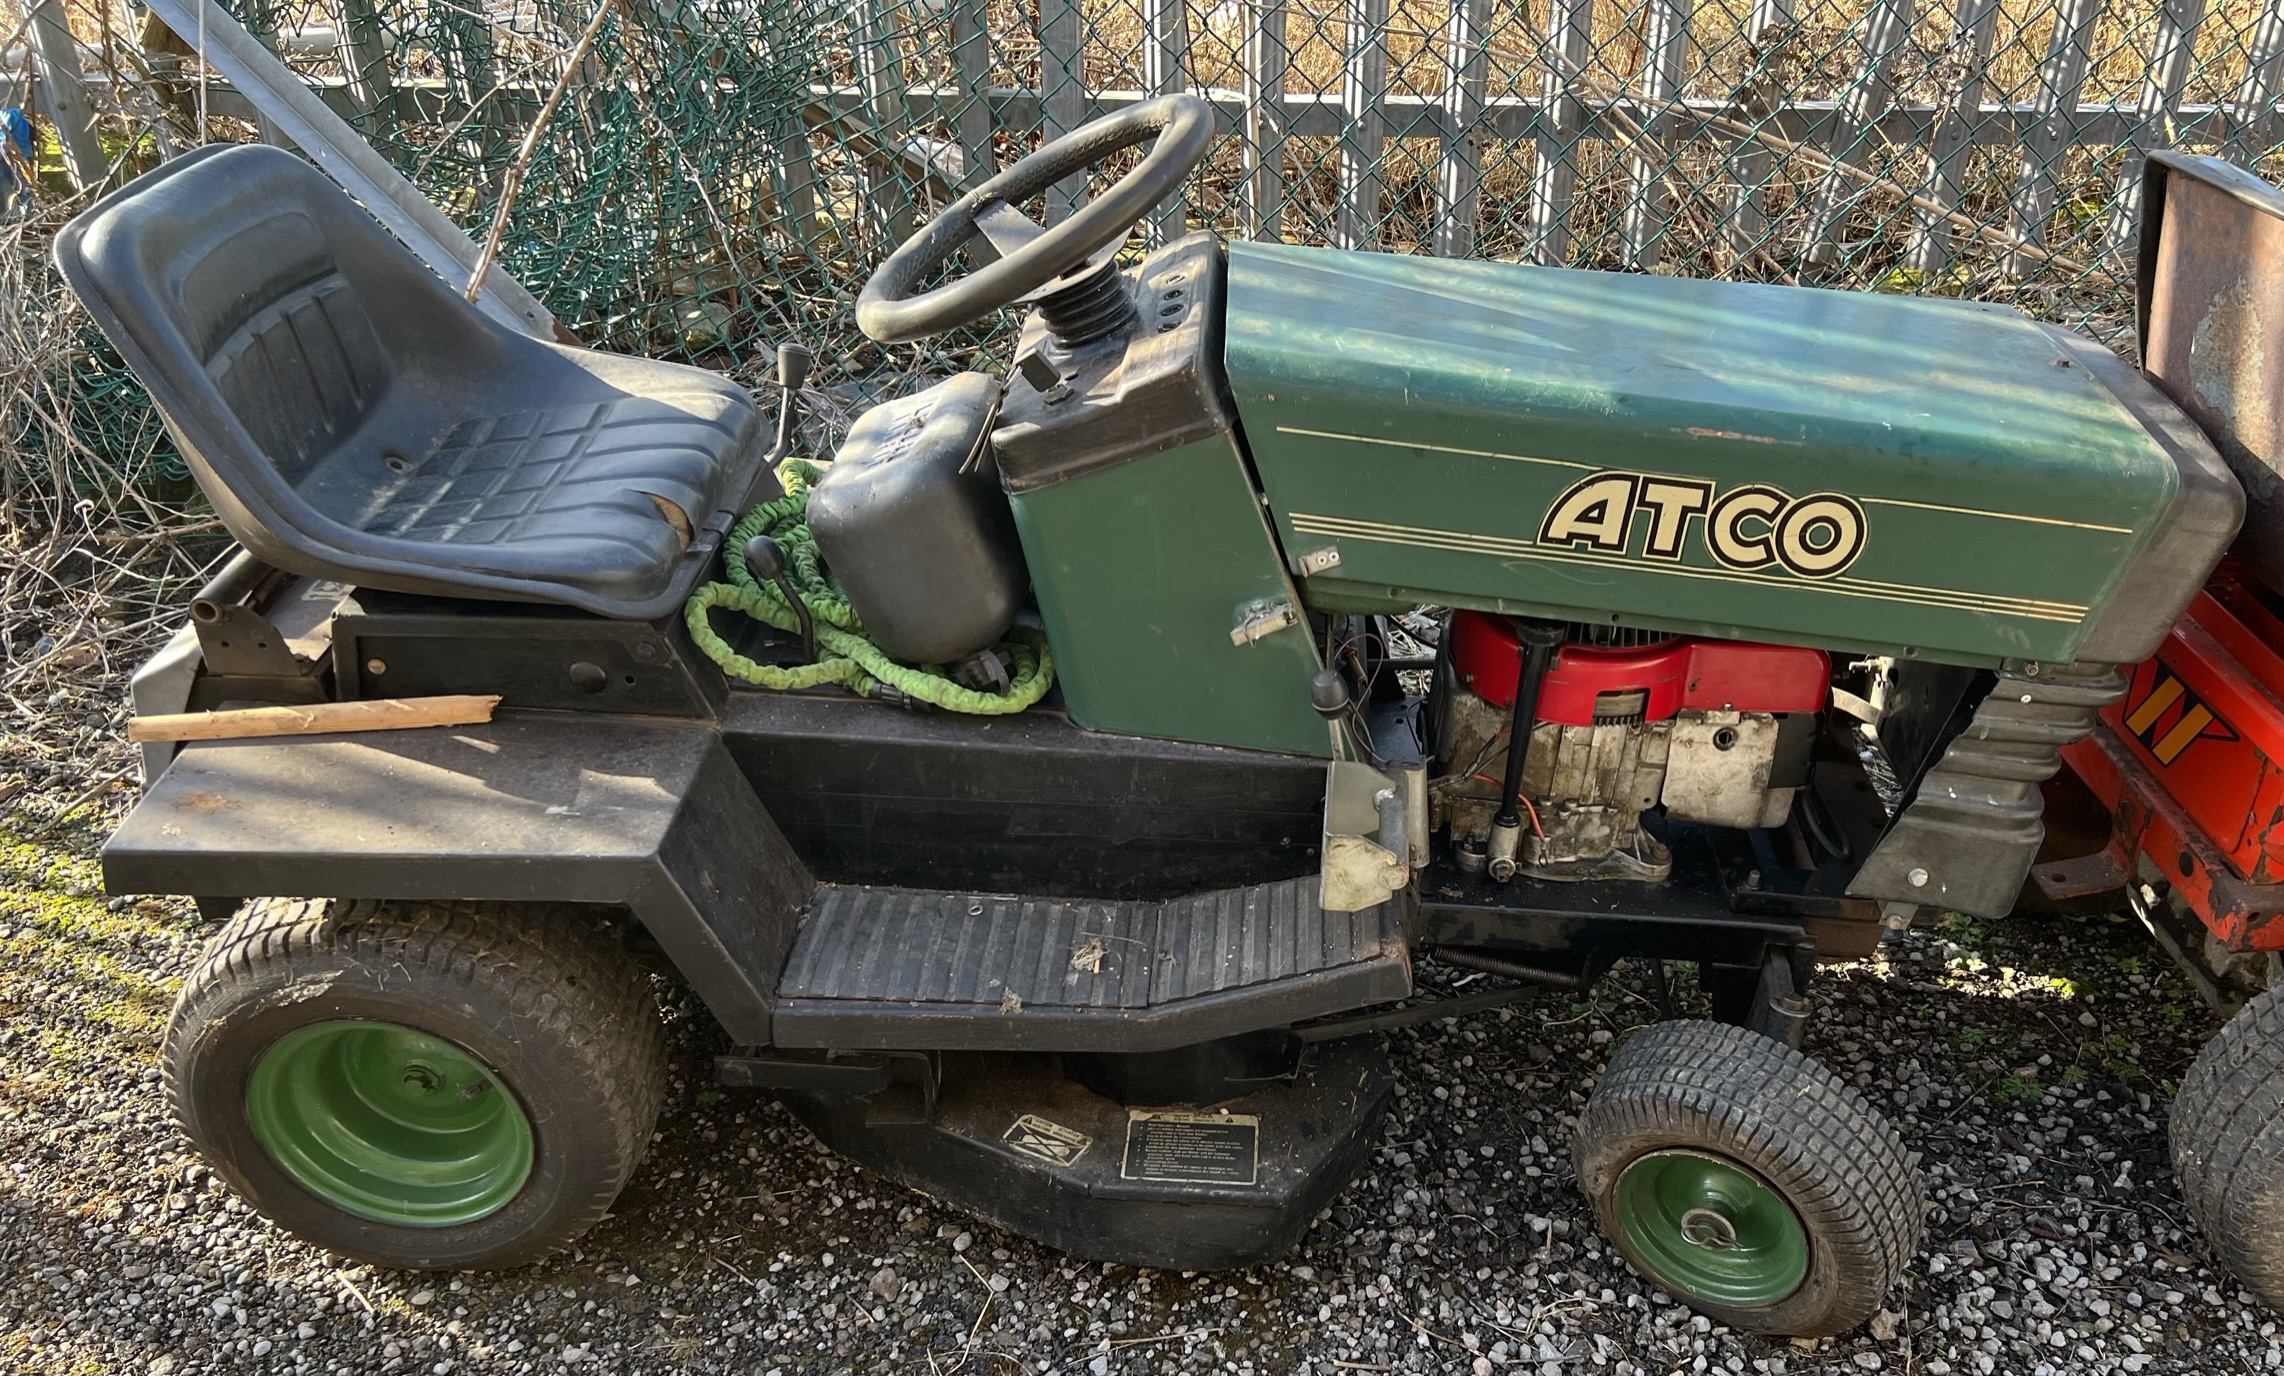 An Atco ride on lawn mower (Sold for spares)